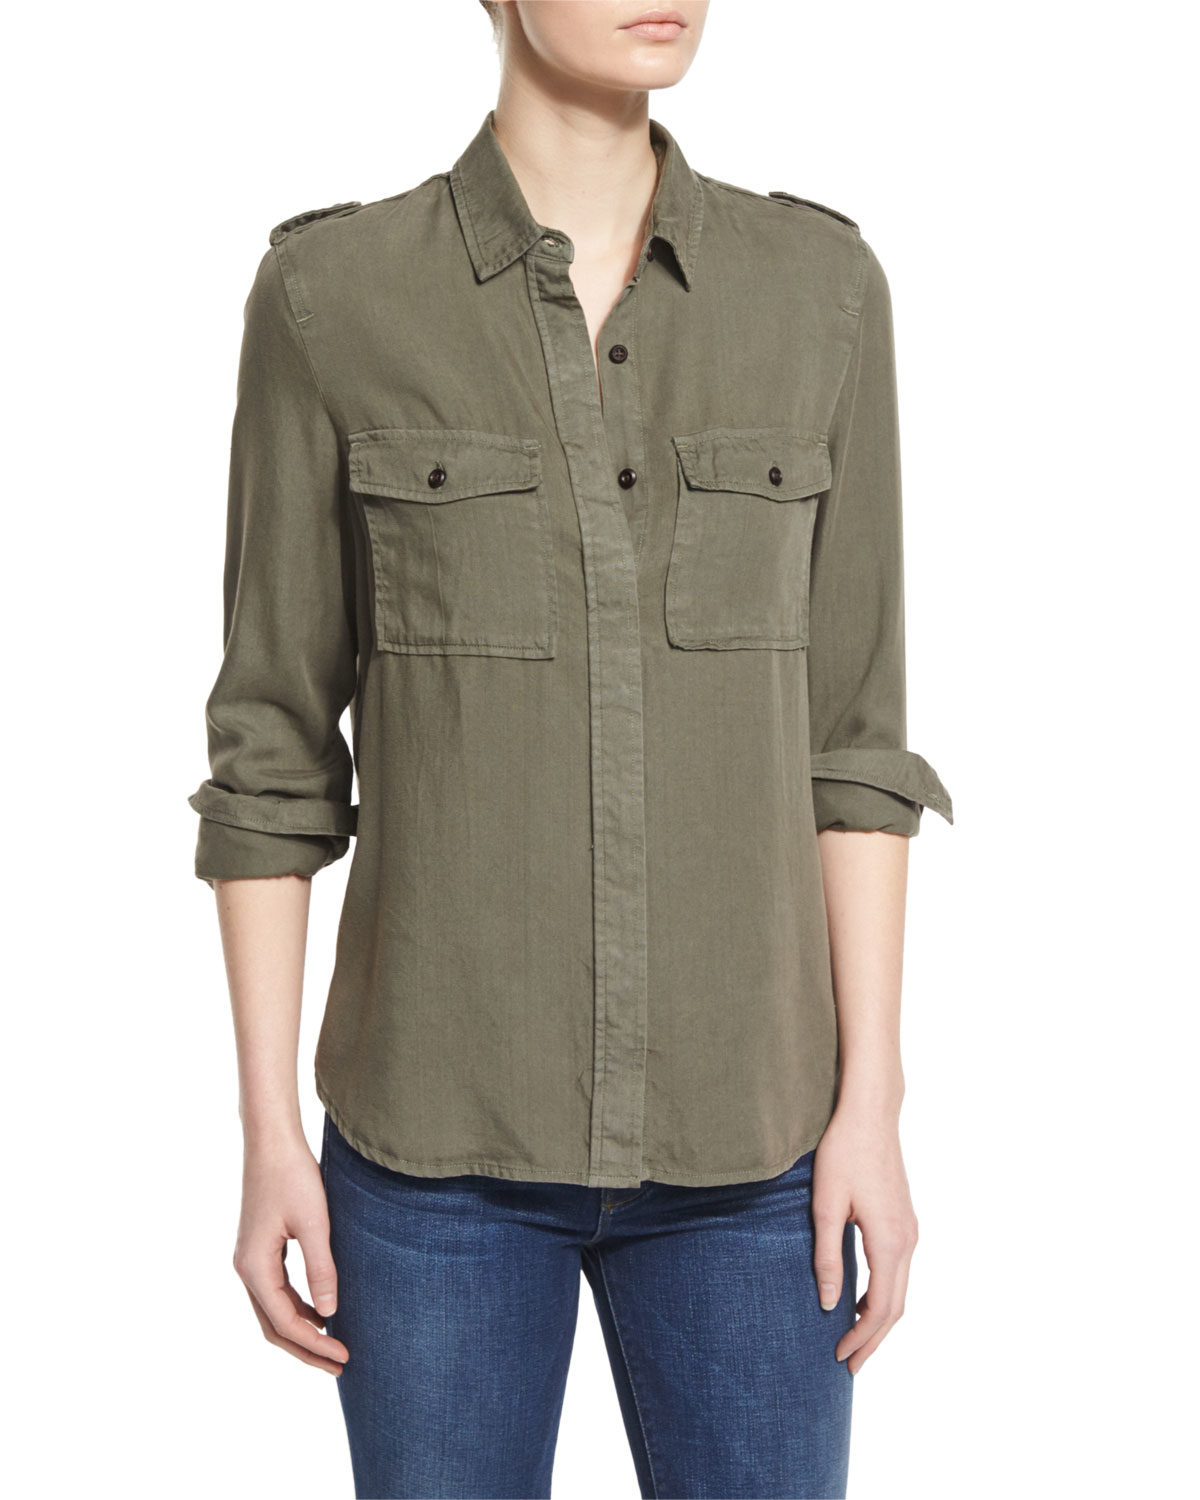 Lyst - Frame Military Long-sleeve Shirt in Green